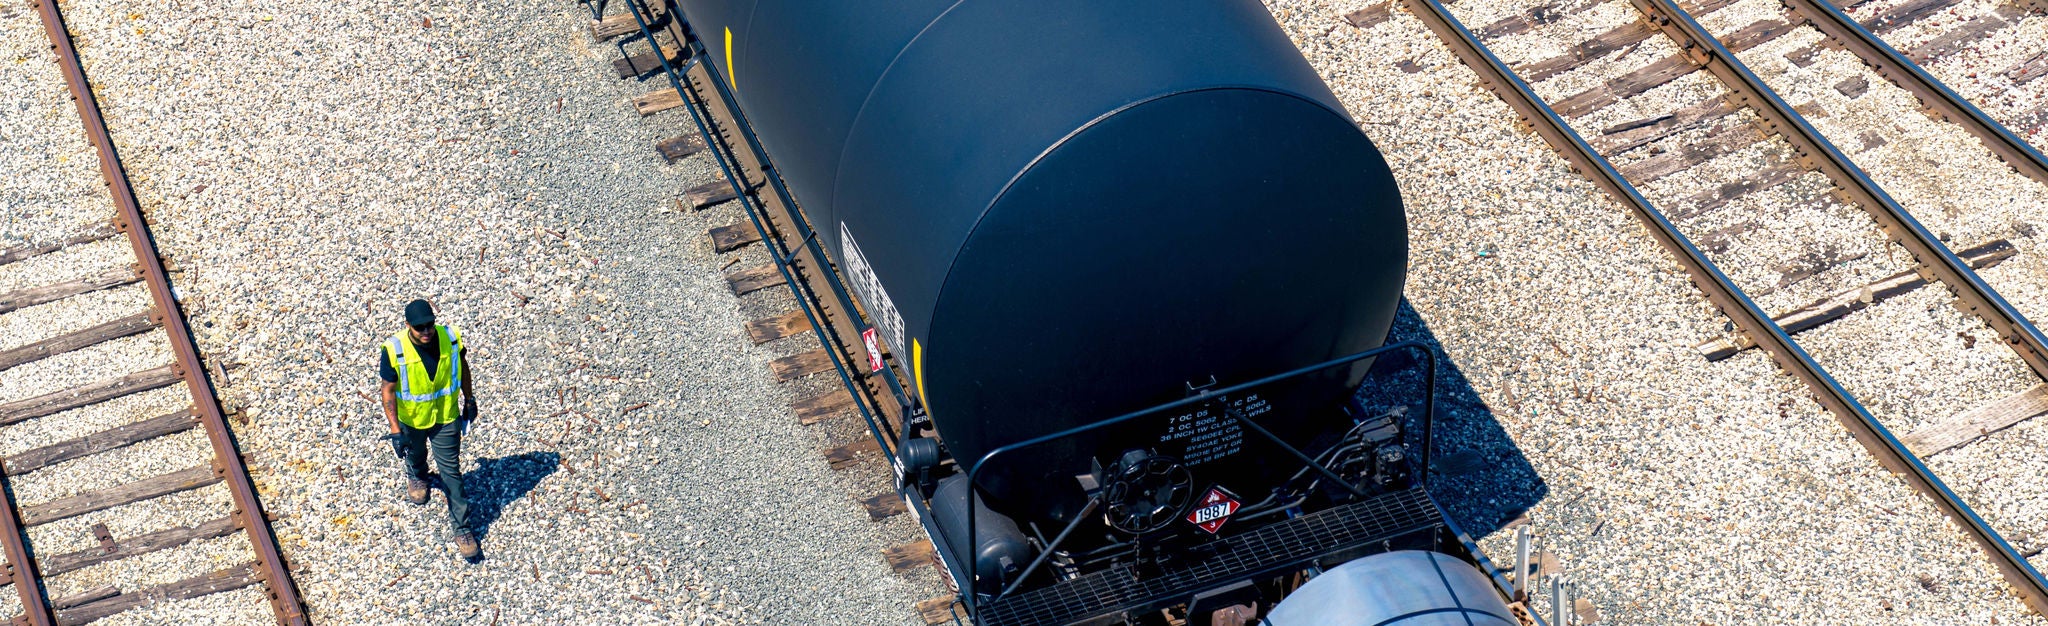 Aerial image of Norfolk Southern train car on tracks transporting low carbon fuels next to an employee